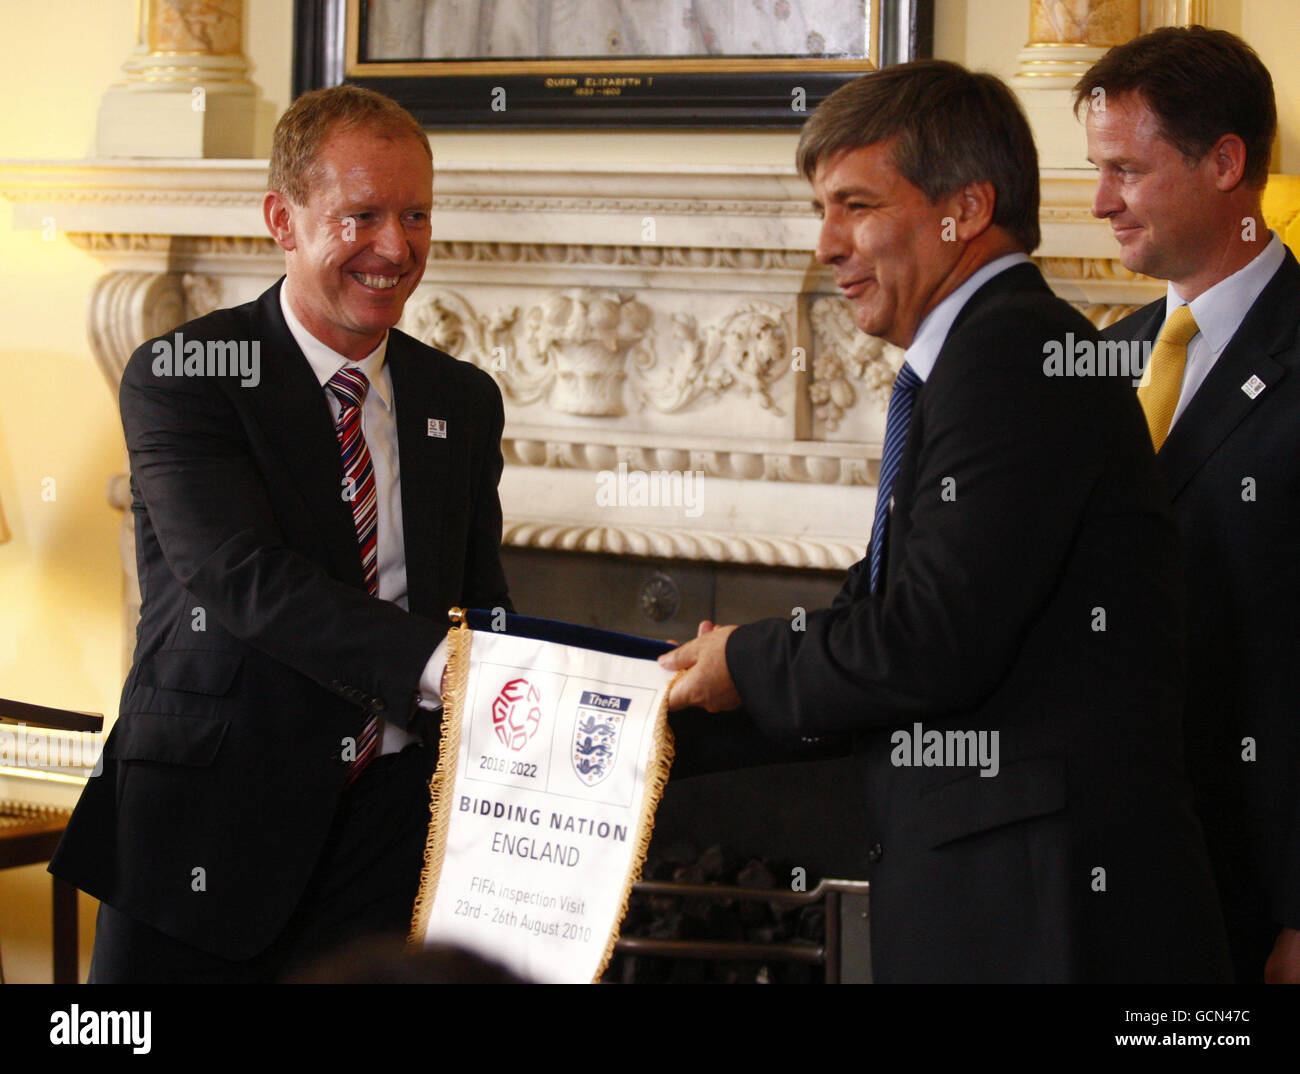 England 2018 CEO Andy Anson (left) presents a pennant to Leader of the FIFA inspection team Harold Mayne Nicholls during a football World Cup 2018 bid event at Number 10, Downing Street in London. Stock Photo